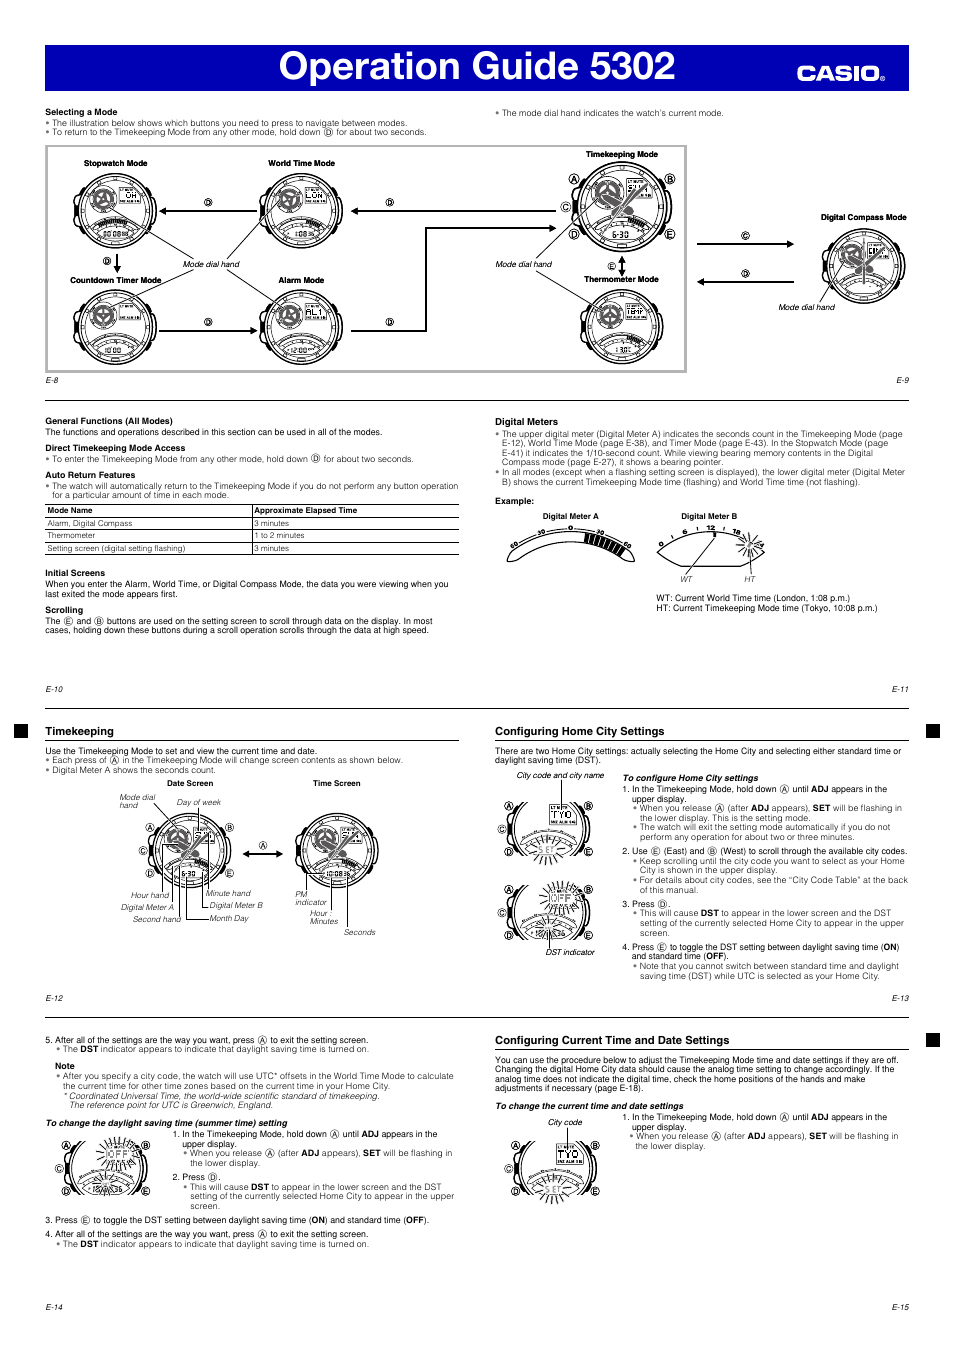 Operation guide 5302 | G-Shock GA-1000 User Manual | Page 2 / 8